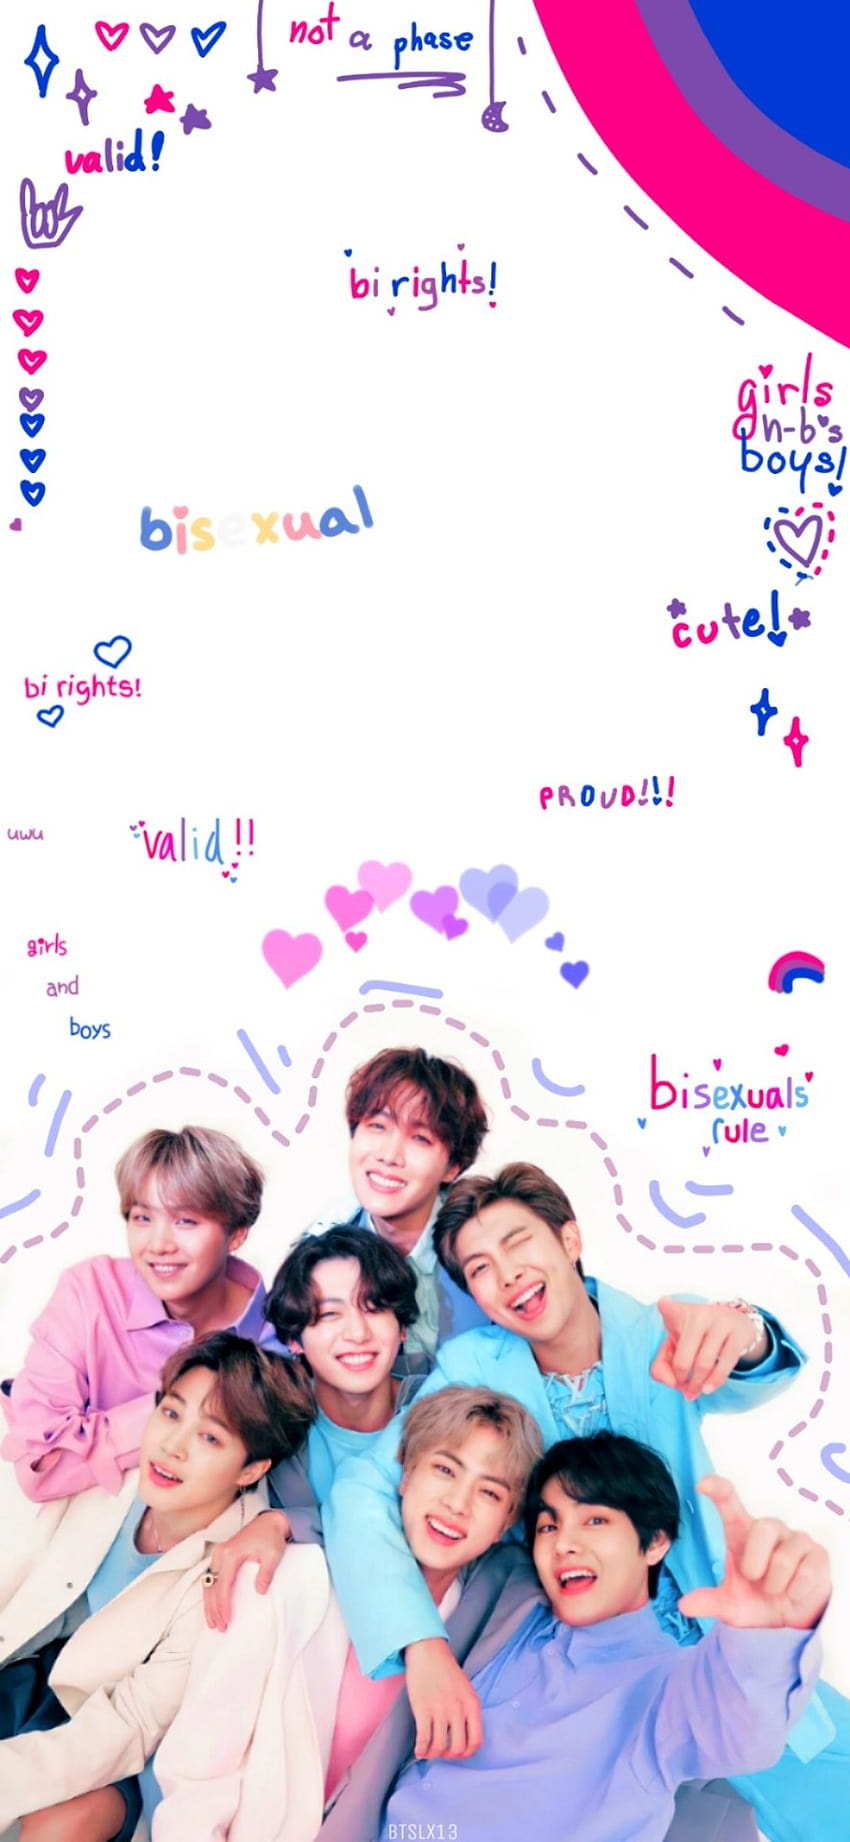 ✦ ⋆⁺₊⋆BTS⋆⁺₊⋆ ✦, bts yet to come HD phone wallpaper